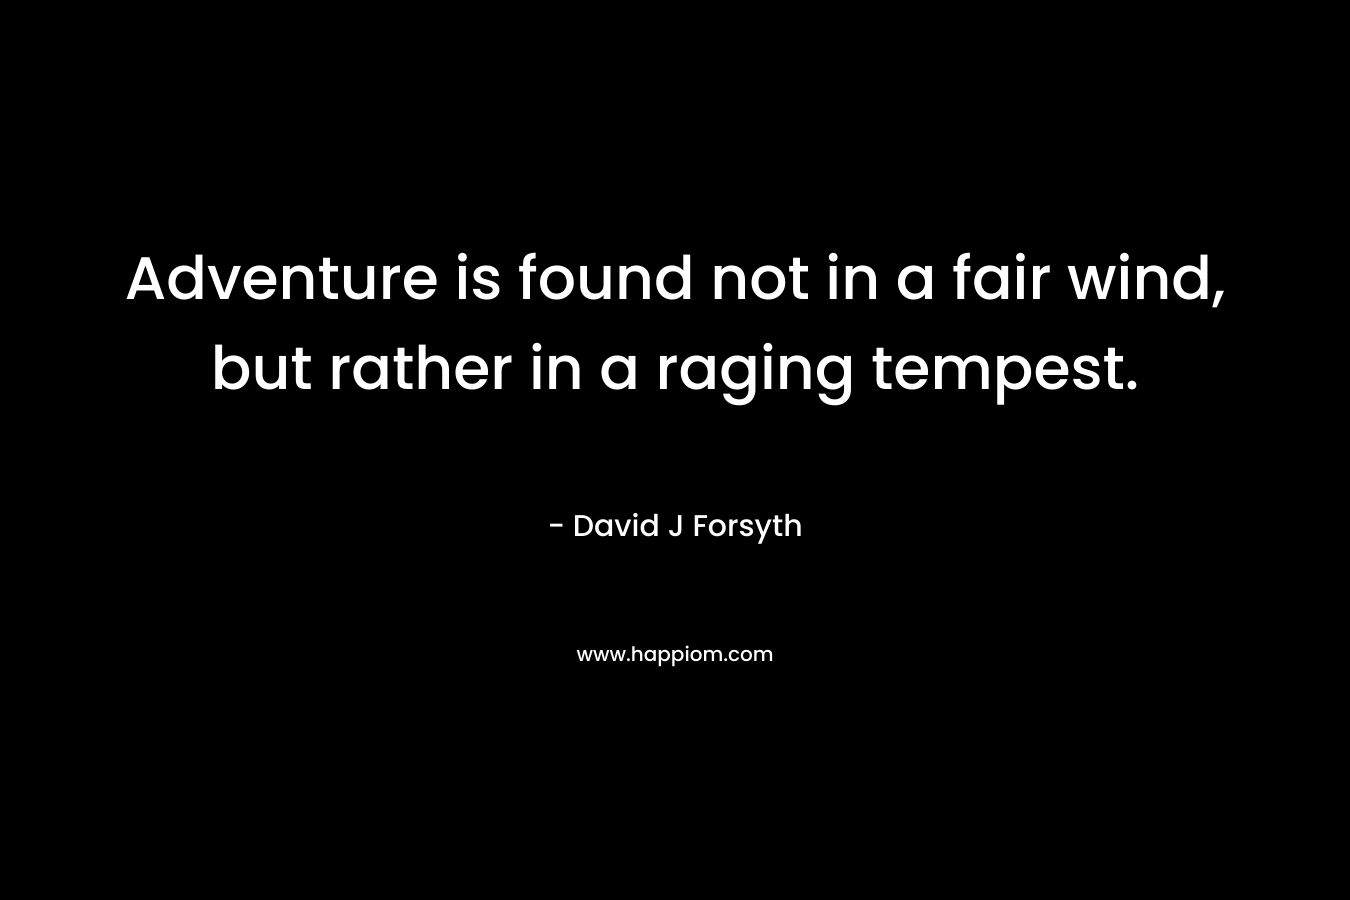 Adventure is found not in a fair wind, but rather in a raging tempest.